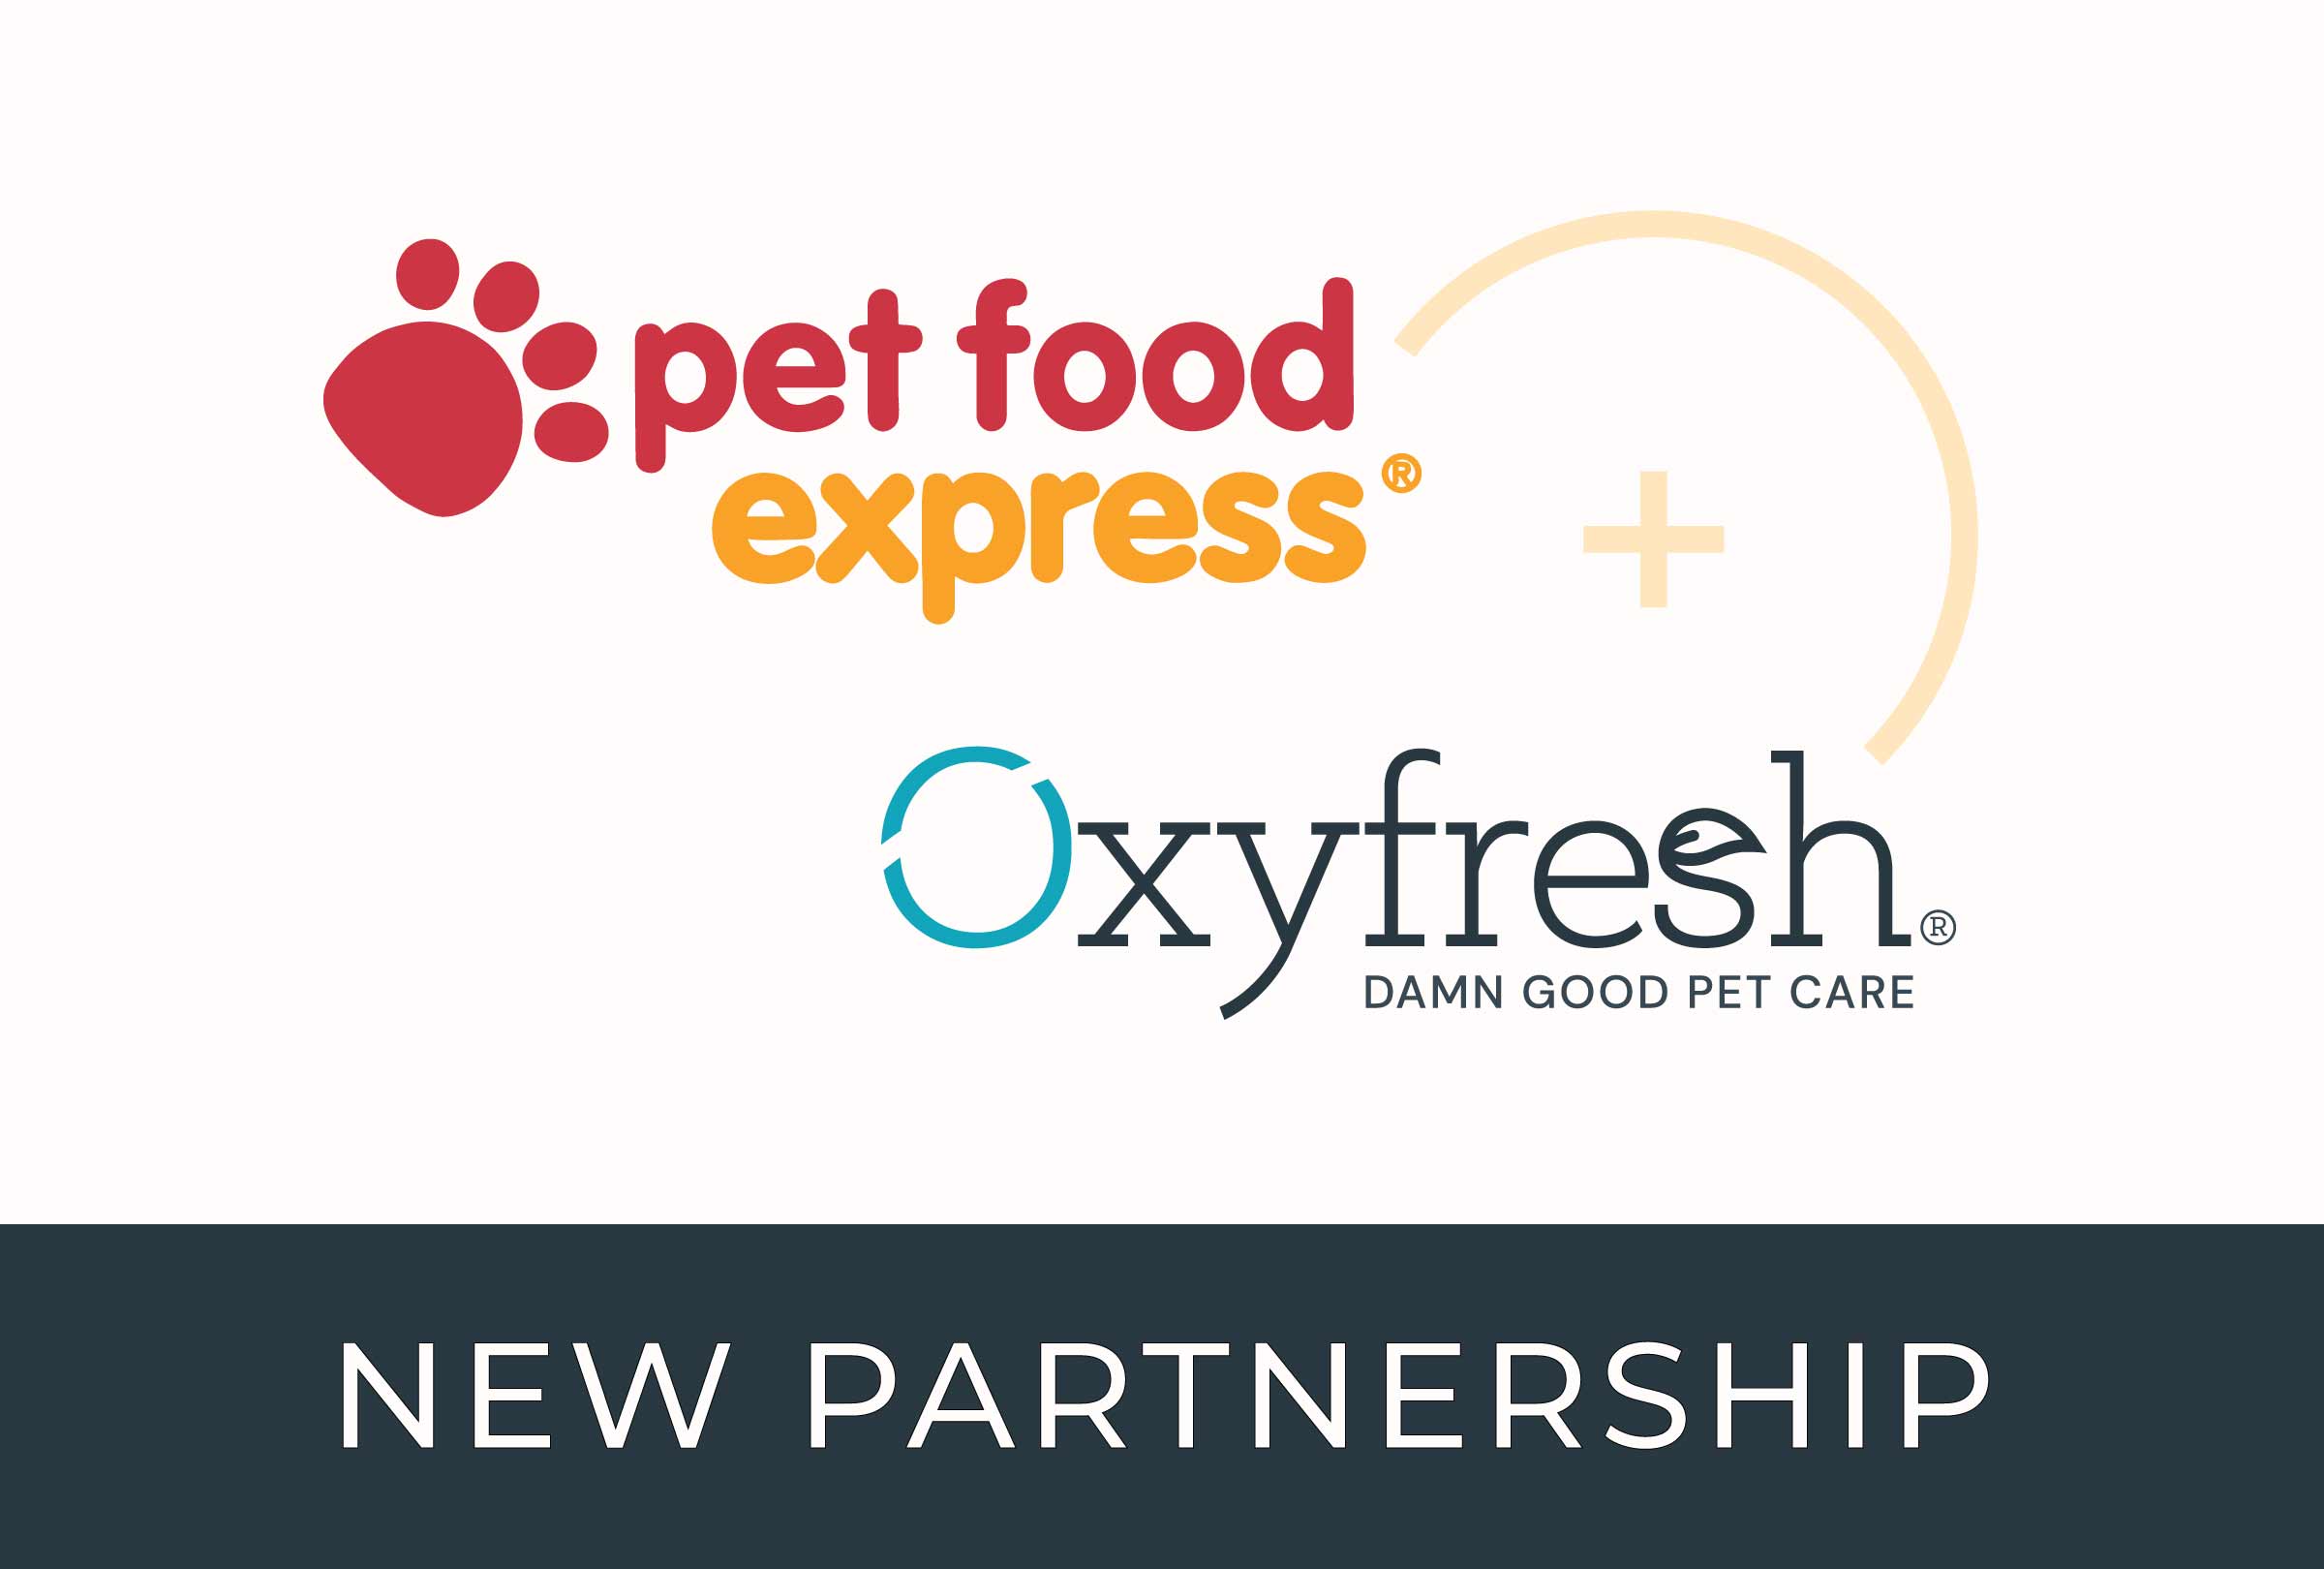 pet food express and oxyfresh have a new prartnership